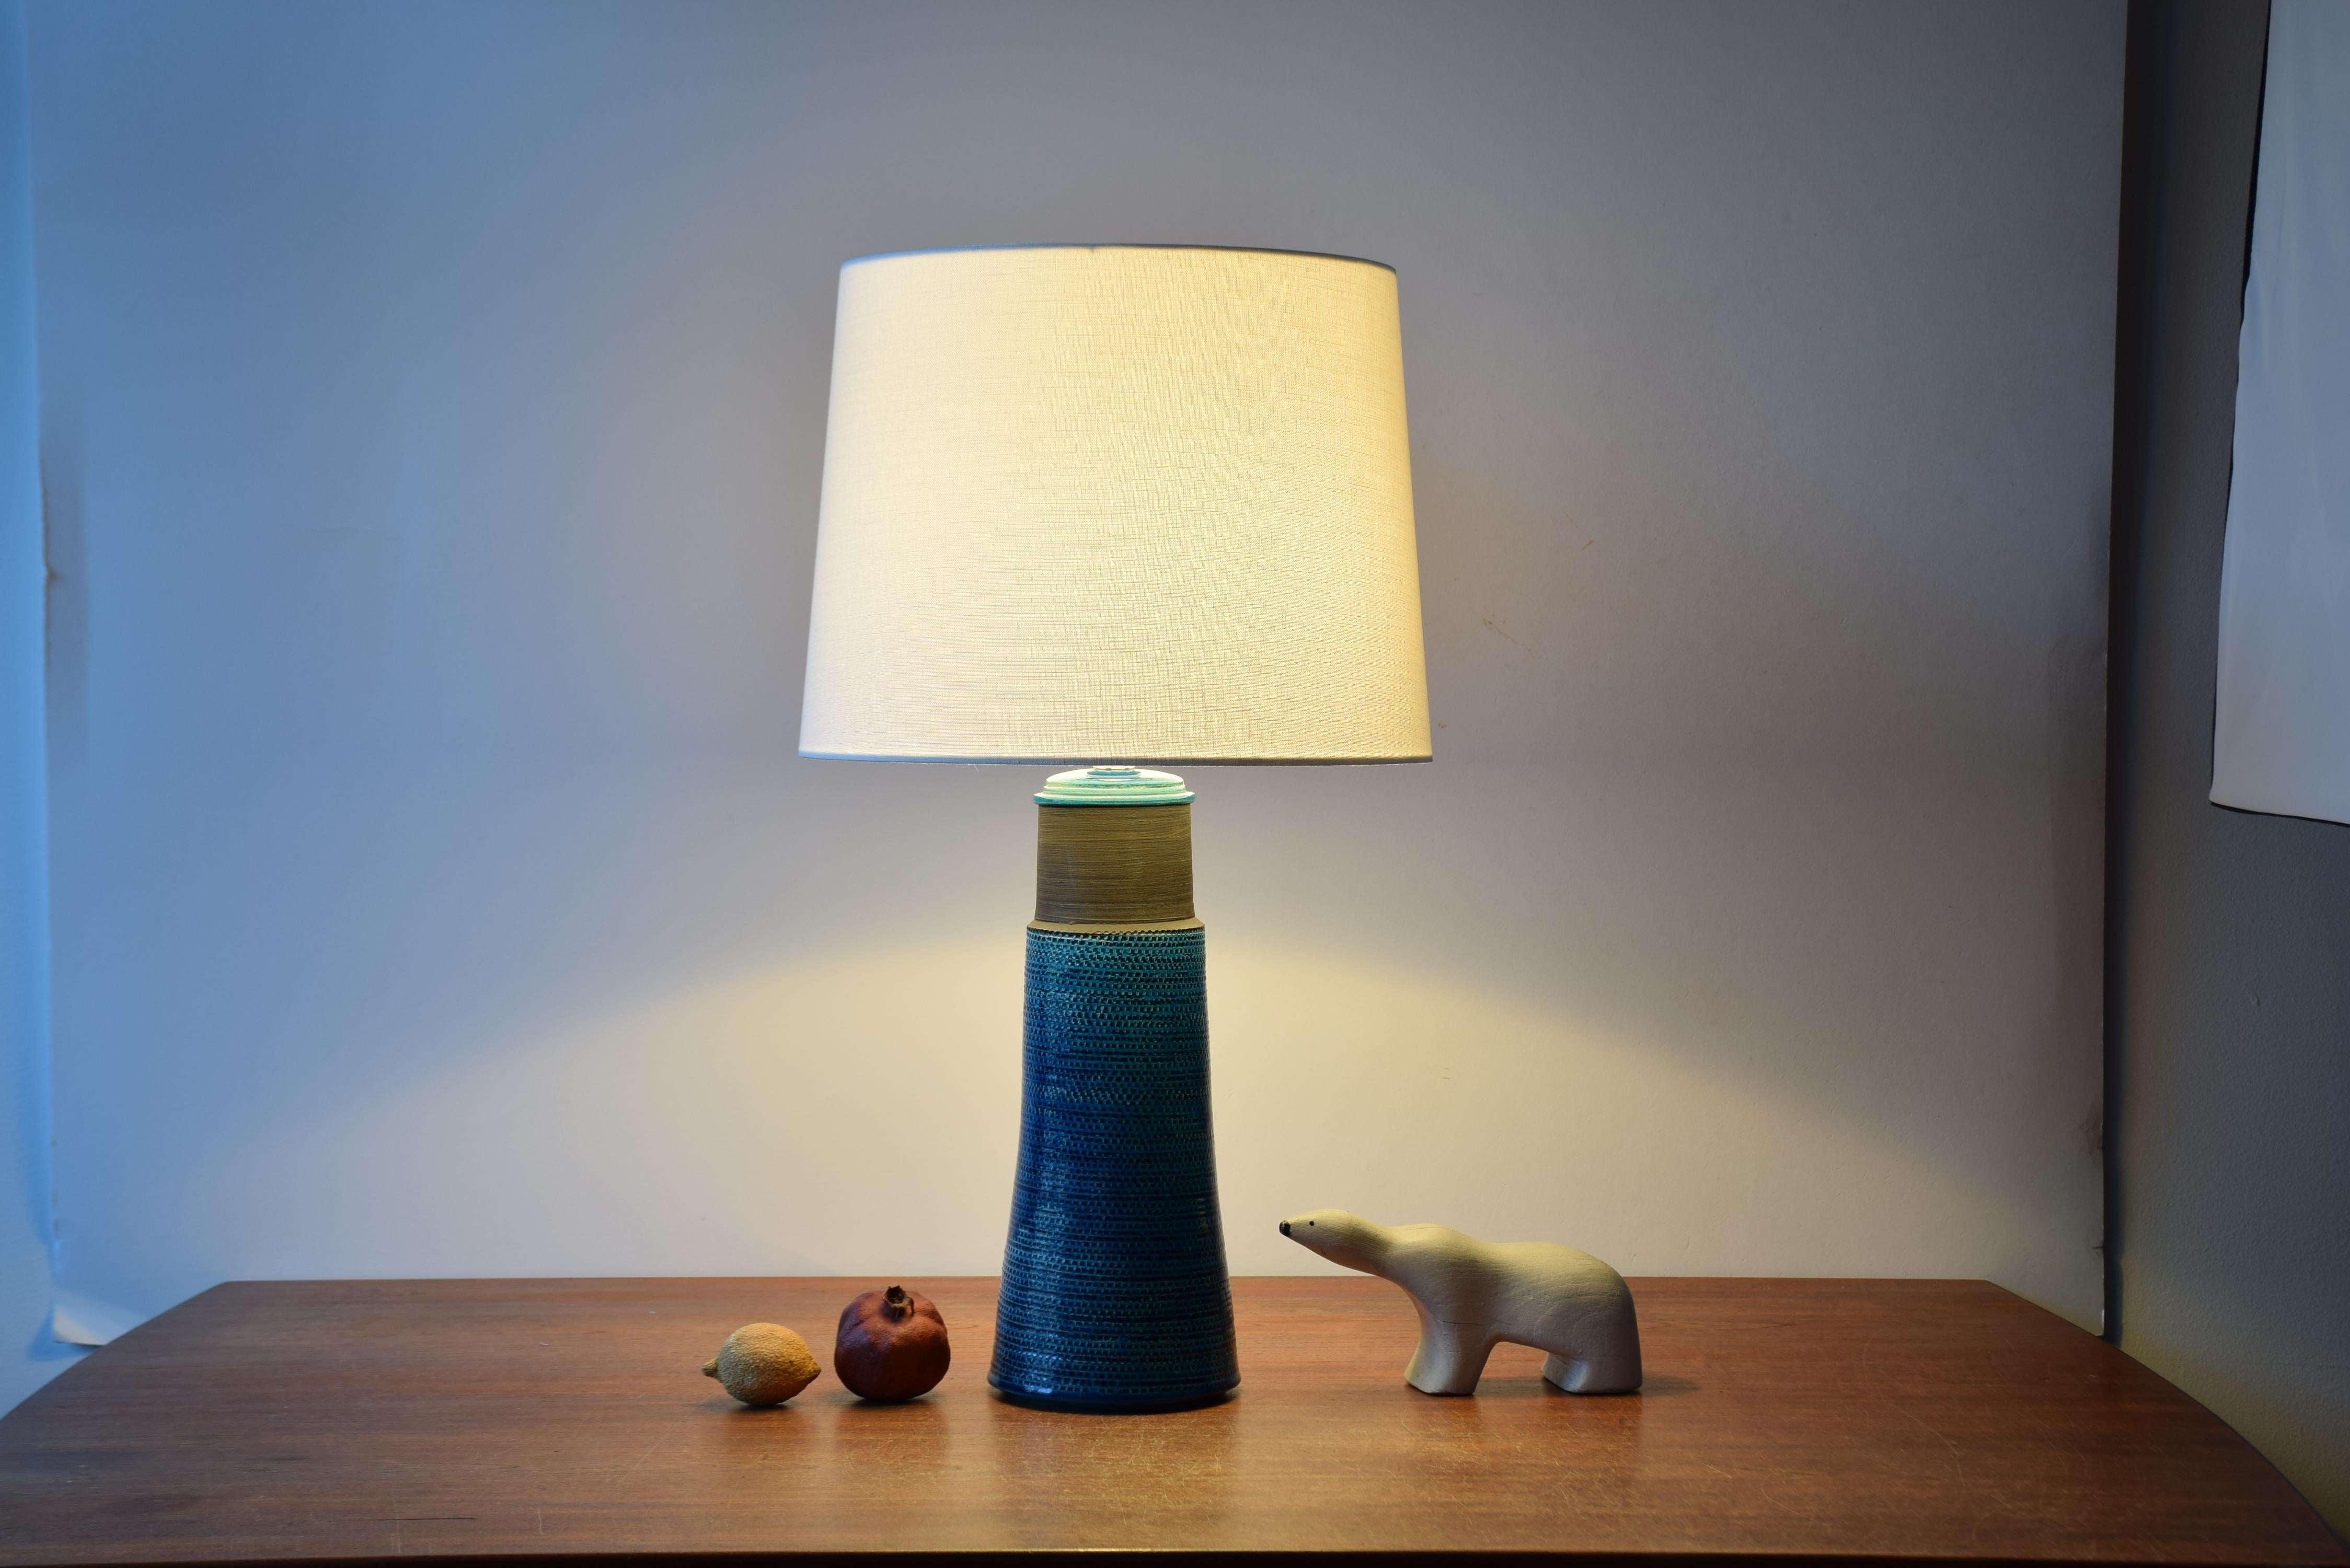 Tall table lamp designed by Nils Kähler and made by Herman August Kähler´s ceramic workshop in Denmark in the 1960´s

Nils Kähler (1906-1979) was fourth generation of the family Kähler. He and his brother Herman Jørgen Kähler, who were in charge